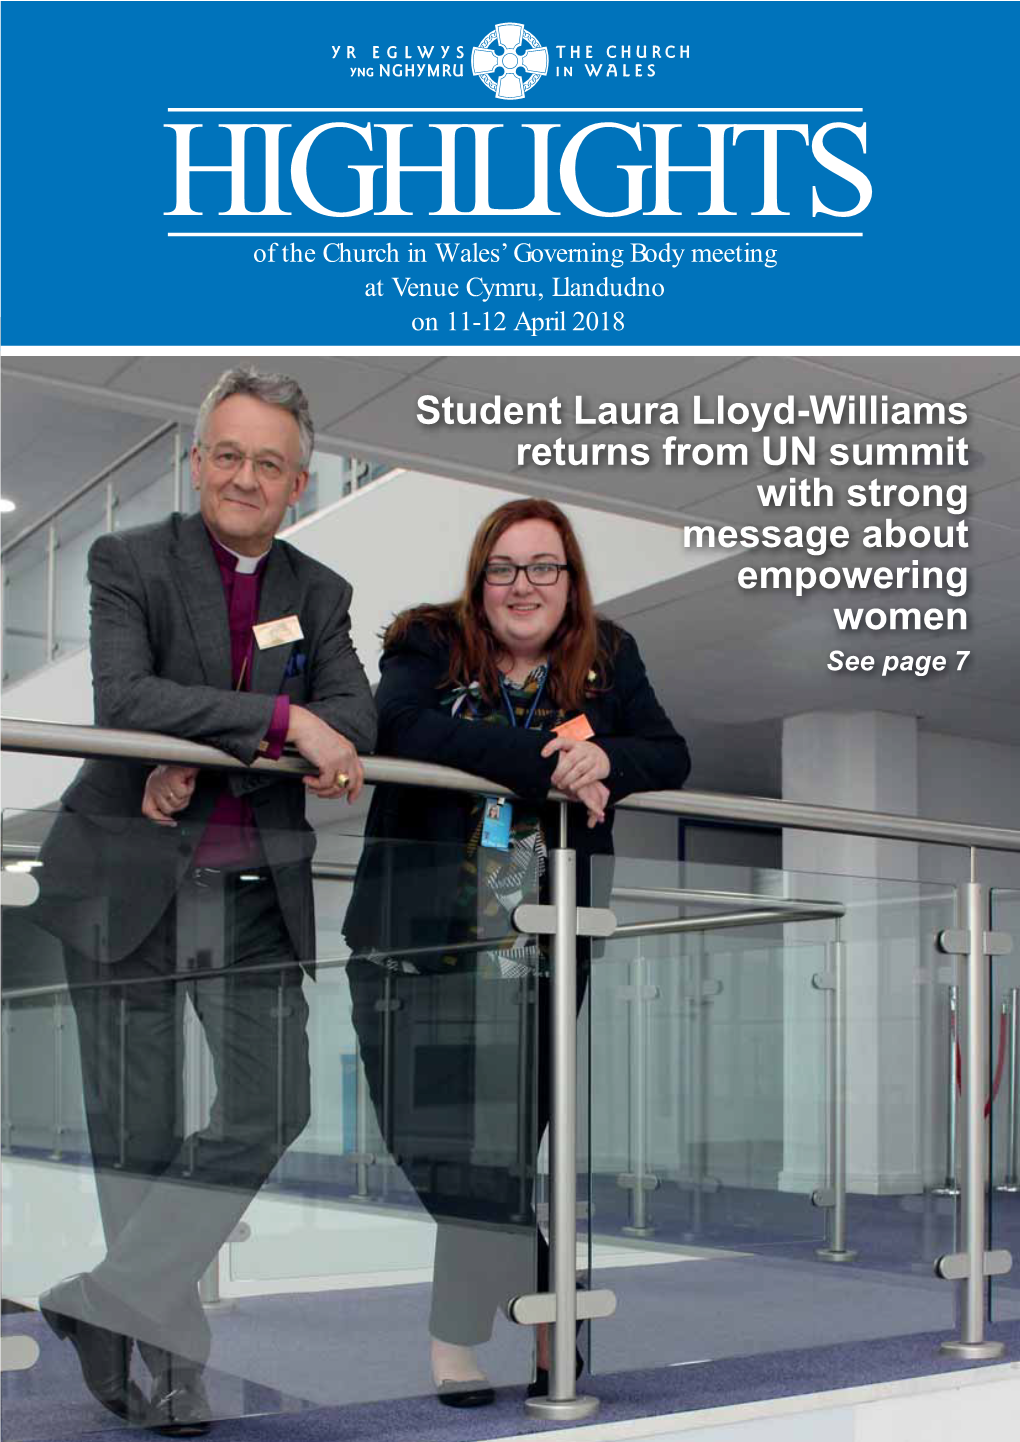 Student Laura Lloyd-Williams Returns from UN Summit with Strong Message About Empowering Women See Page 7 Presidential Address Contents